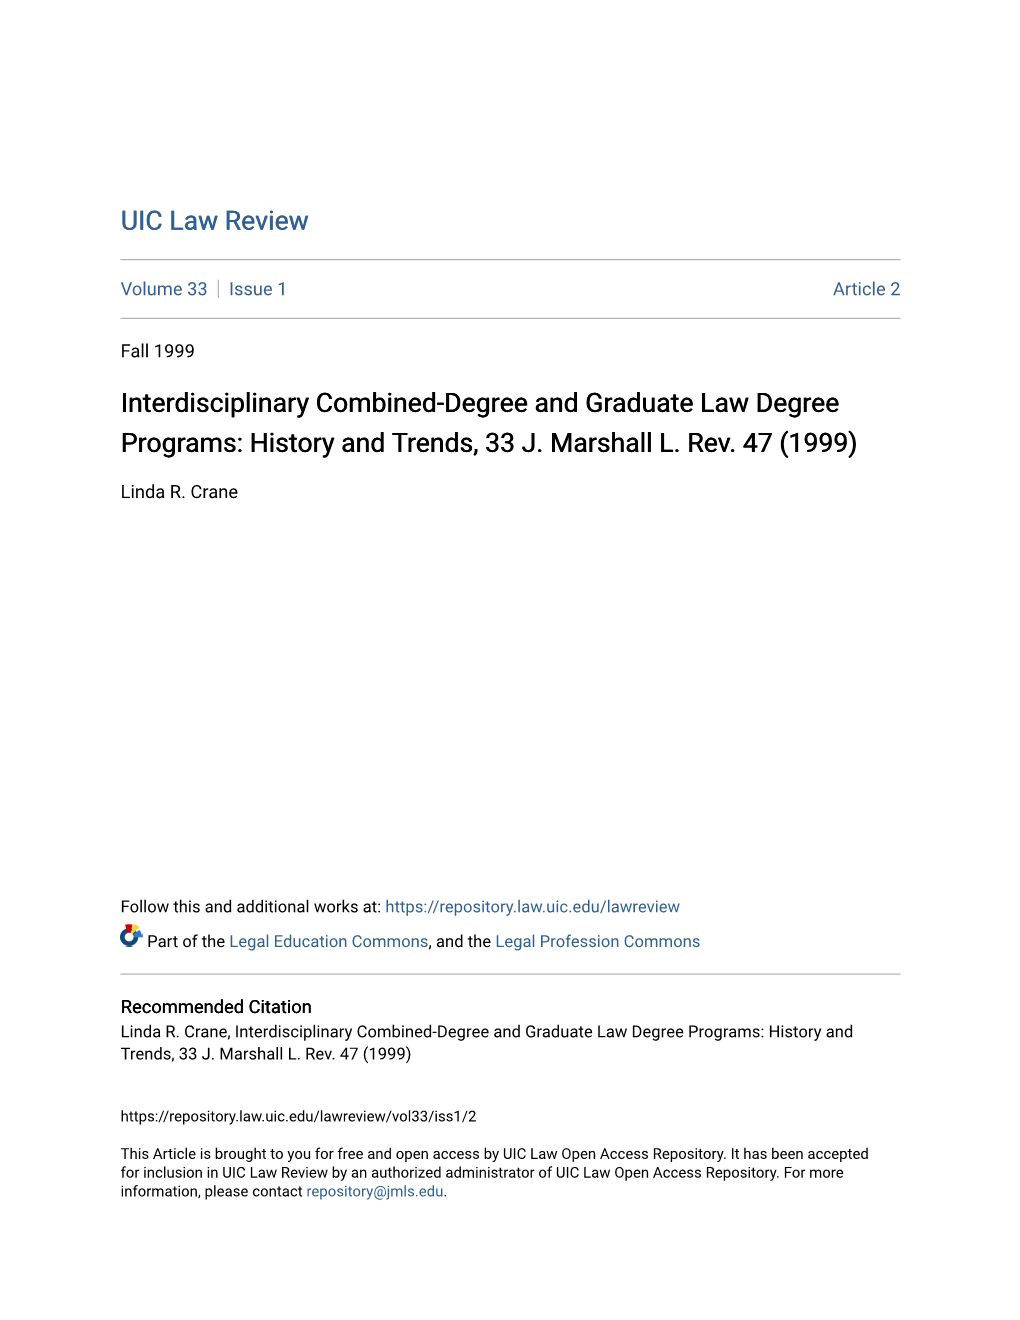 Interdisciplinary Combined-Degree and Graduate Law Degree Programs: History and Trends, 33 J